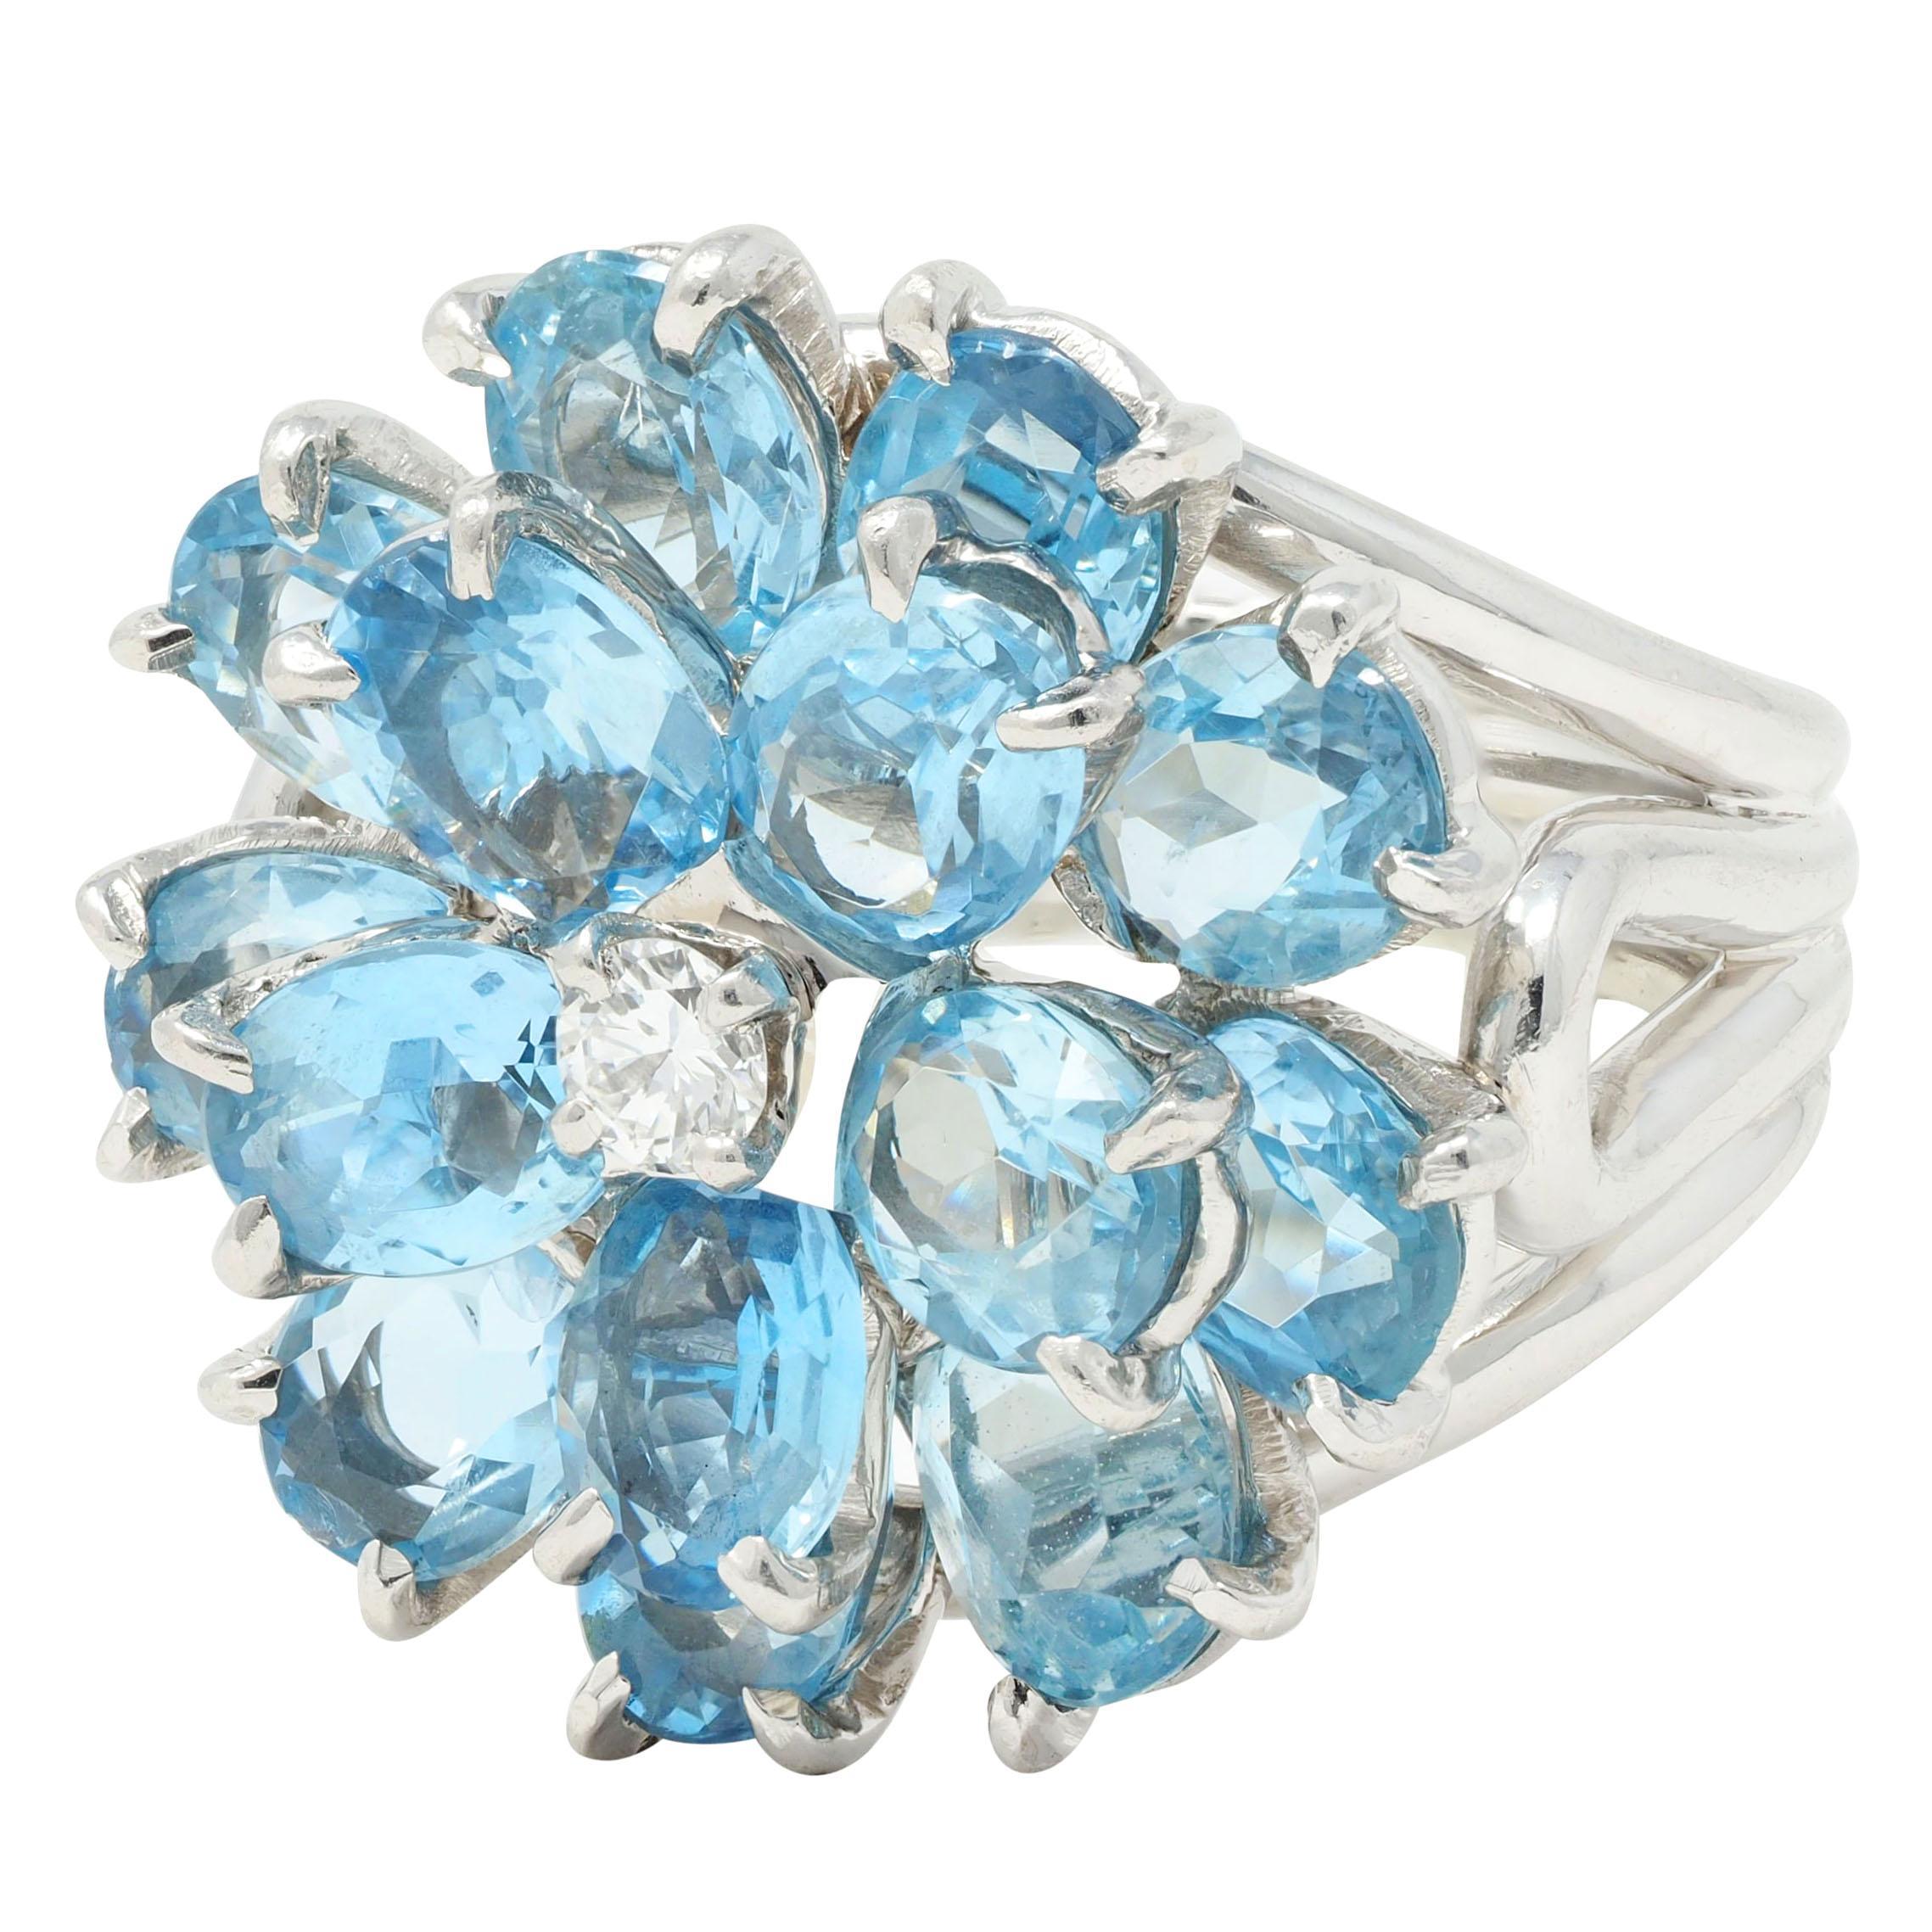 Designed as a flower motif comprised of oval cut aquamarine petals 
Weighing approximately 5.61 carats total - transparent light blue 
Prong set in a wire basket - centering a round brilliant cut diamond 
Weighing approximately 0.10 carat - eye